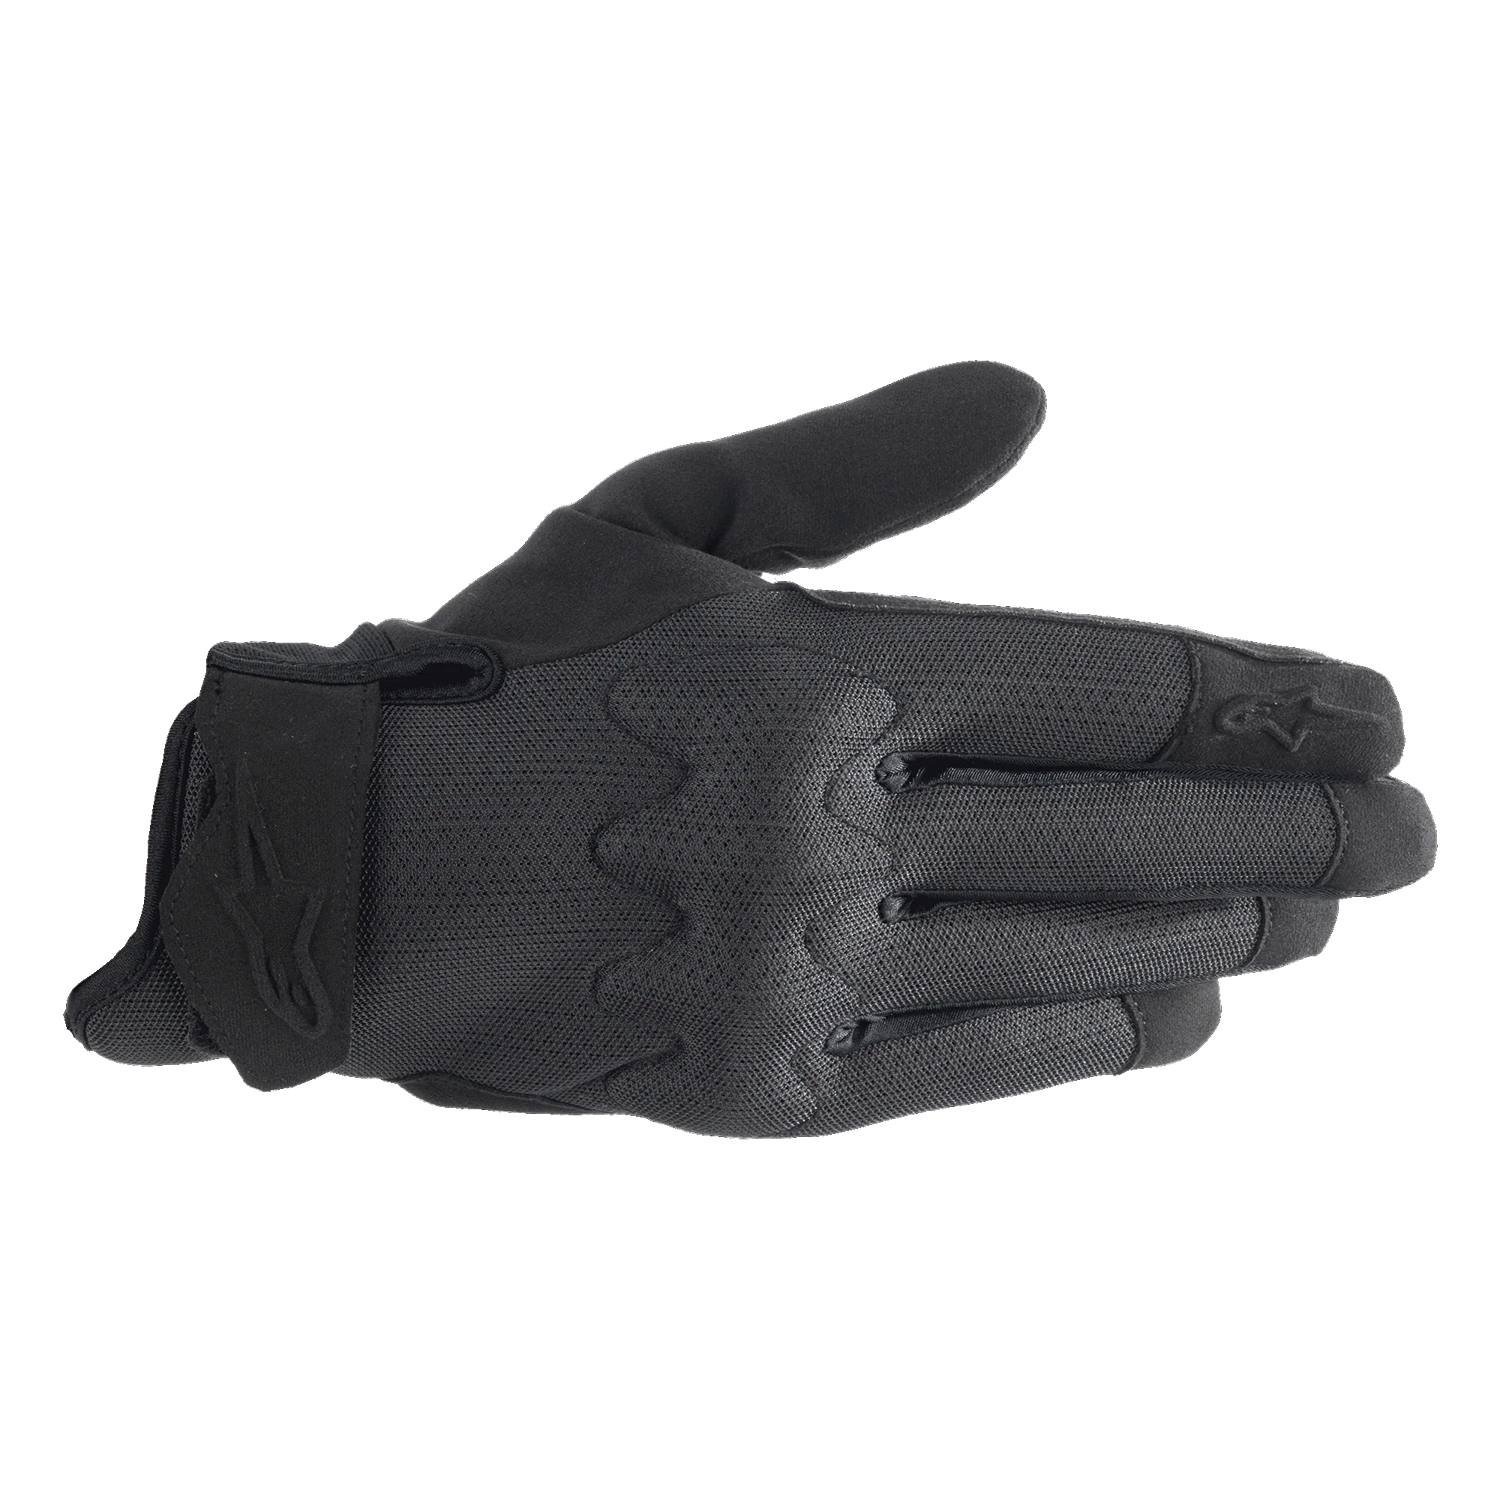 Image of Alpinestars Stated Air Gloves Black Size L ID 8059347145235